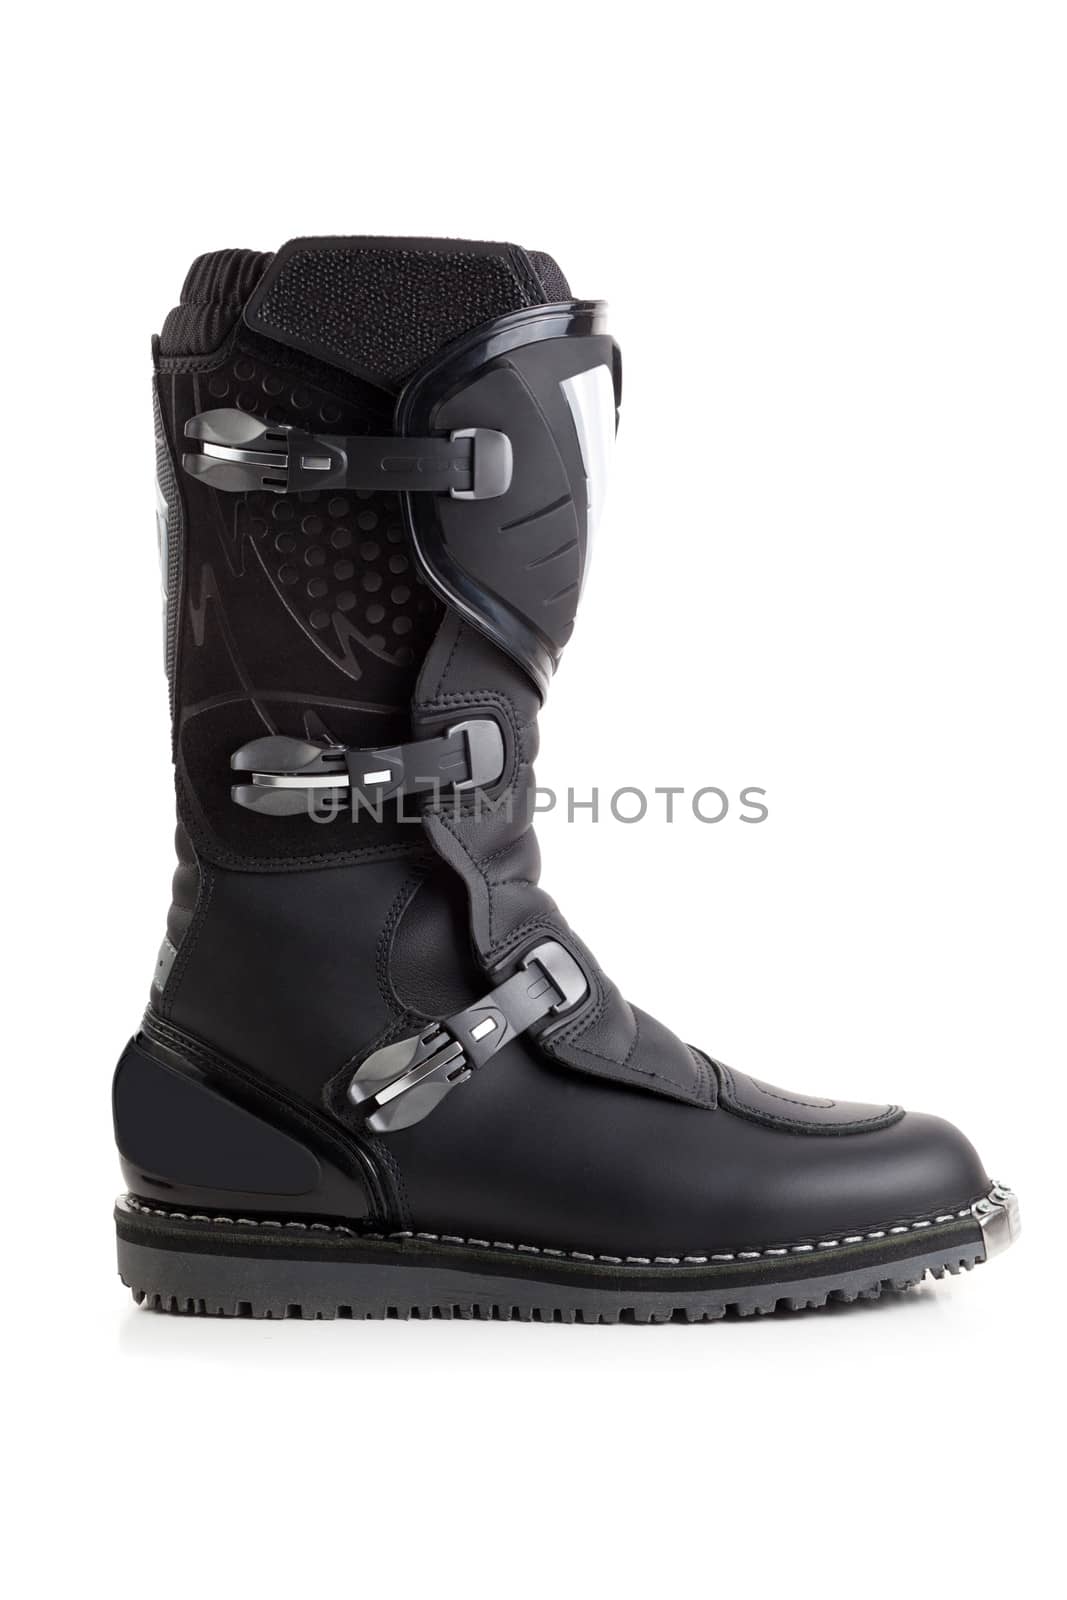 Enduro boot for riding on a motorcycle isolated on white